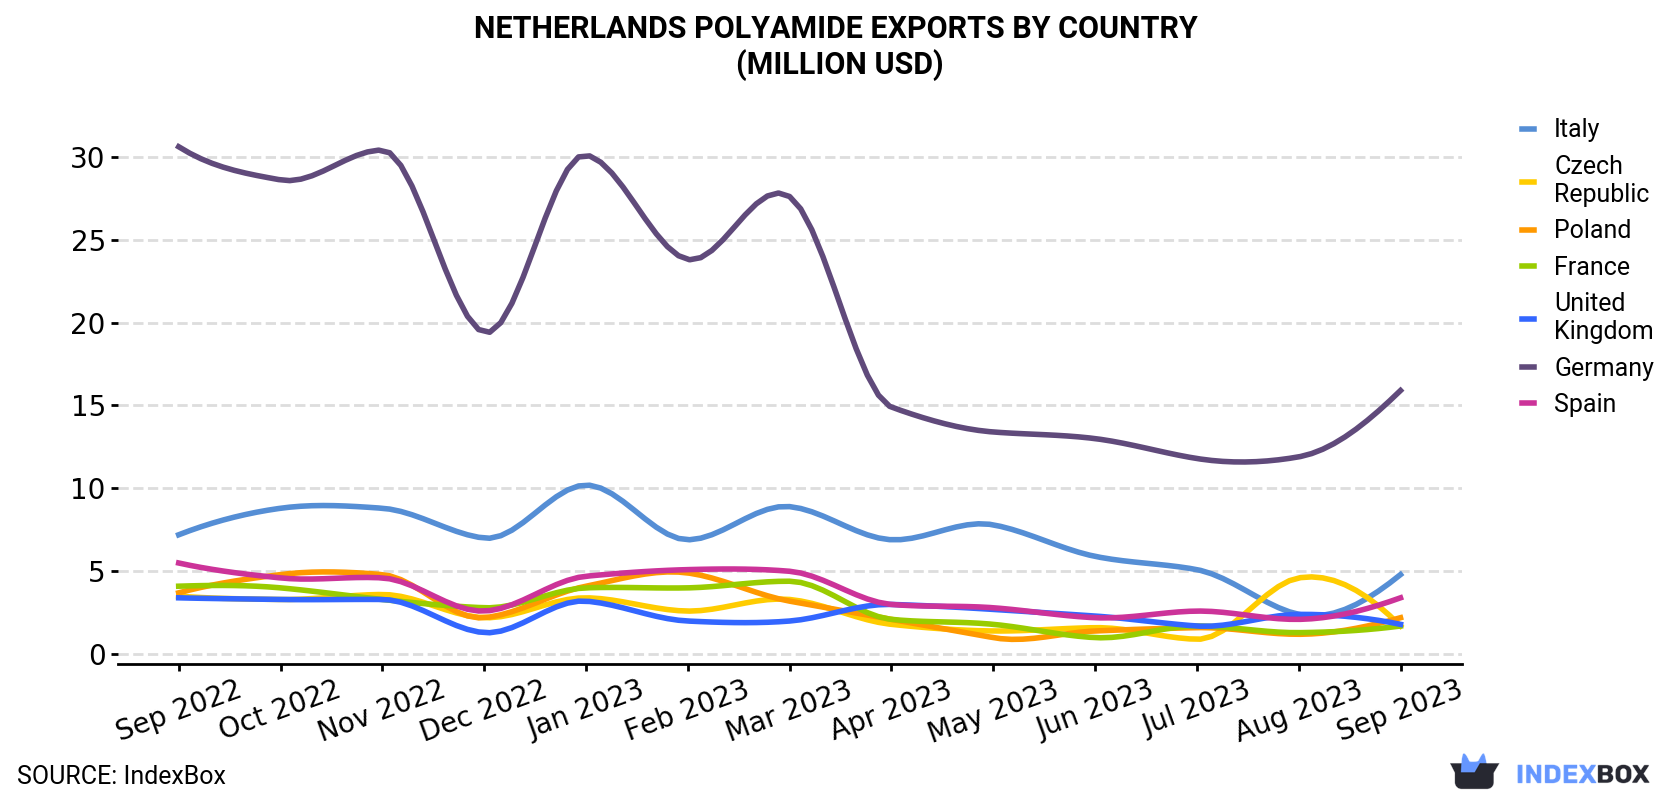 Netherlands Polyamide Exports By Country (Million USD)